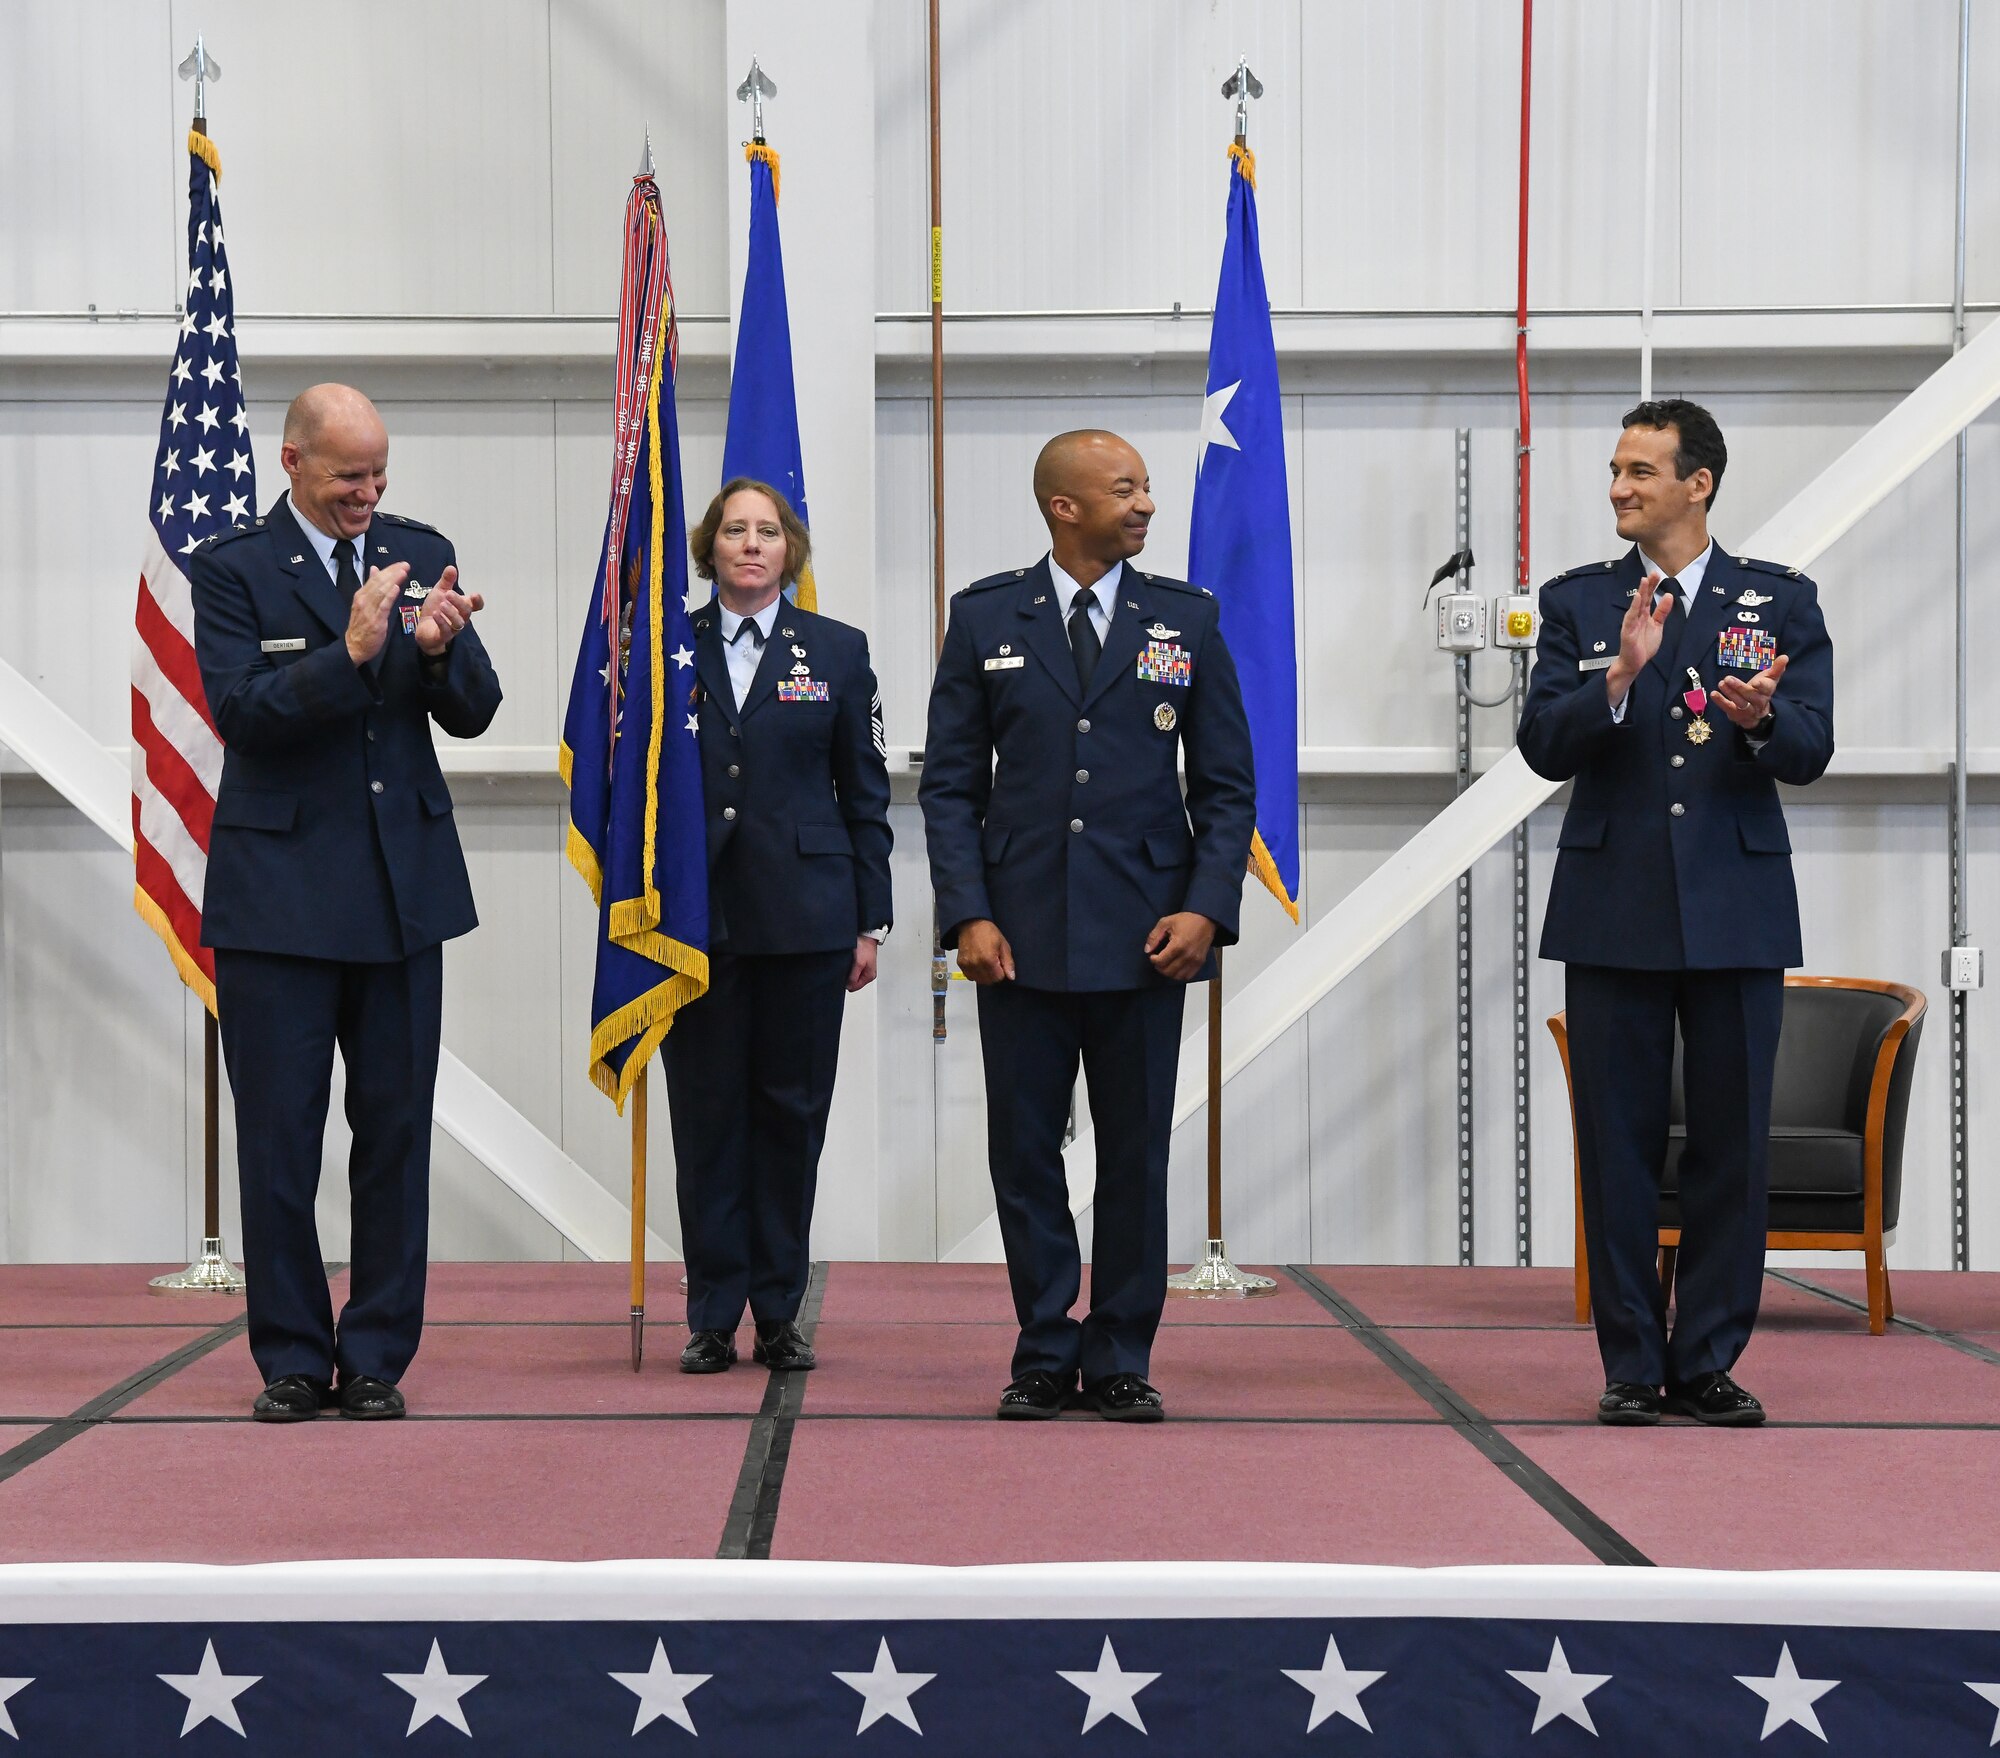 Air Force Test Center Commander Maj. Gen. Evan Dertien, left, and Col. Jeffrey Geraghty, right, previous commander of Arnold Engineering Development Complex, applaud Col. Randel Gordon, center, after he assumed command of AEDC during a Change of Command Ceremony June 16, 2022, in the Aircraft Test Support Facility at Arnold Air Force Base, Tennessee. Also pictured is Chief Master Sgt. Jennifer Cirricione, senior enlisted leader, AEDC. (U.S. Air Force photo by Jill Pickett)